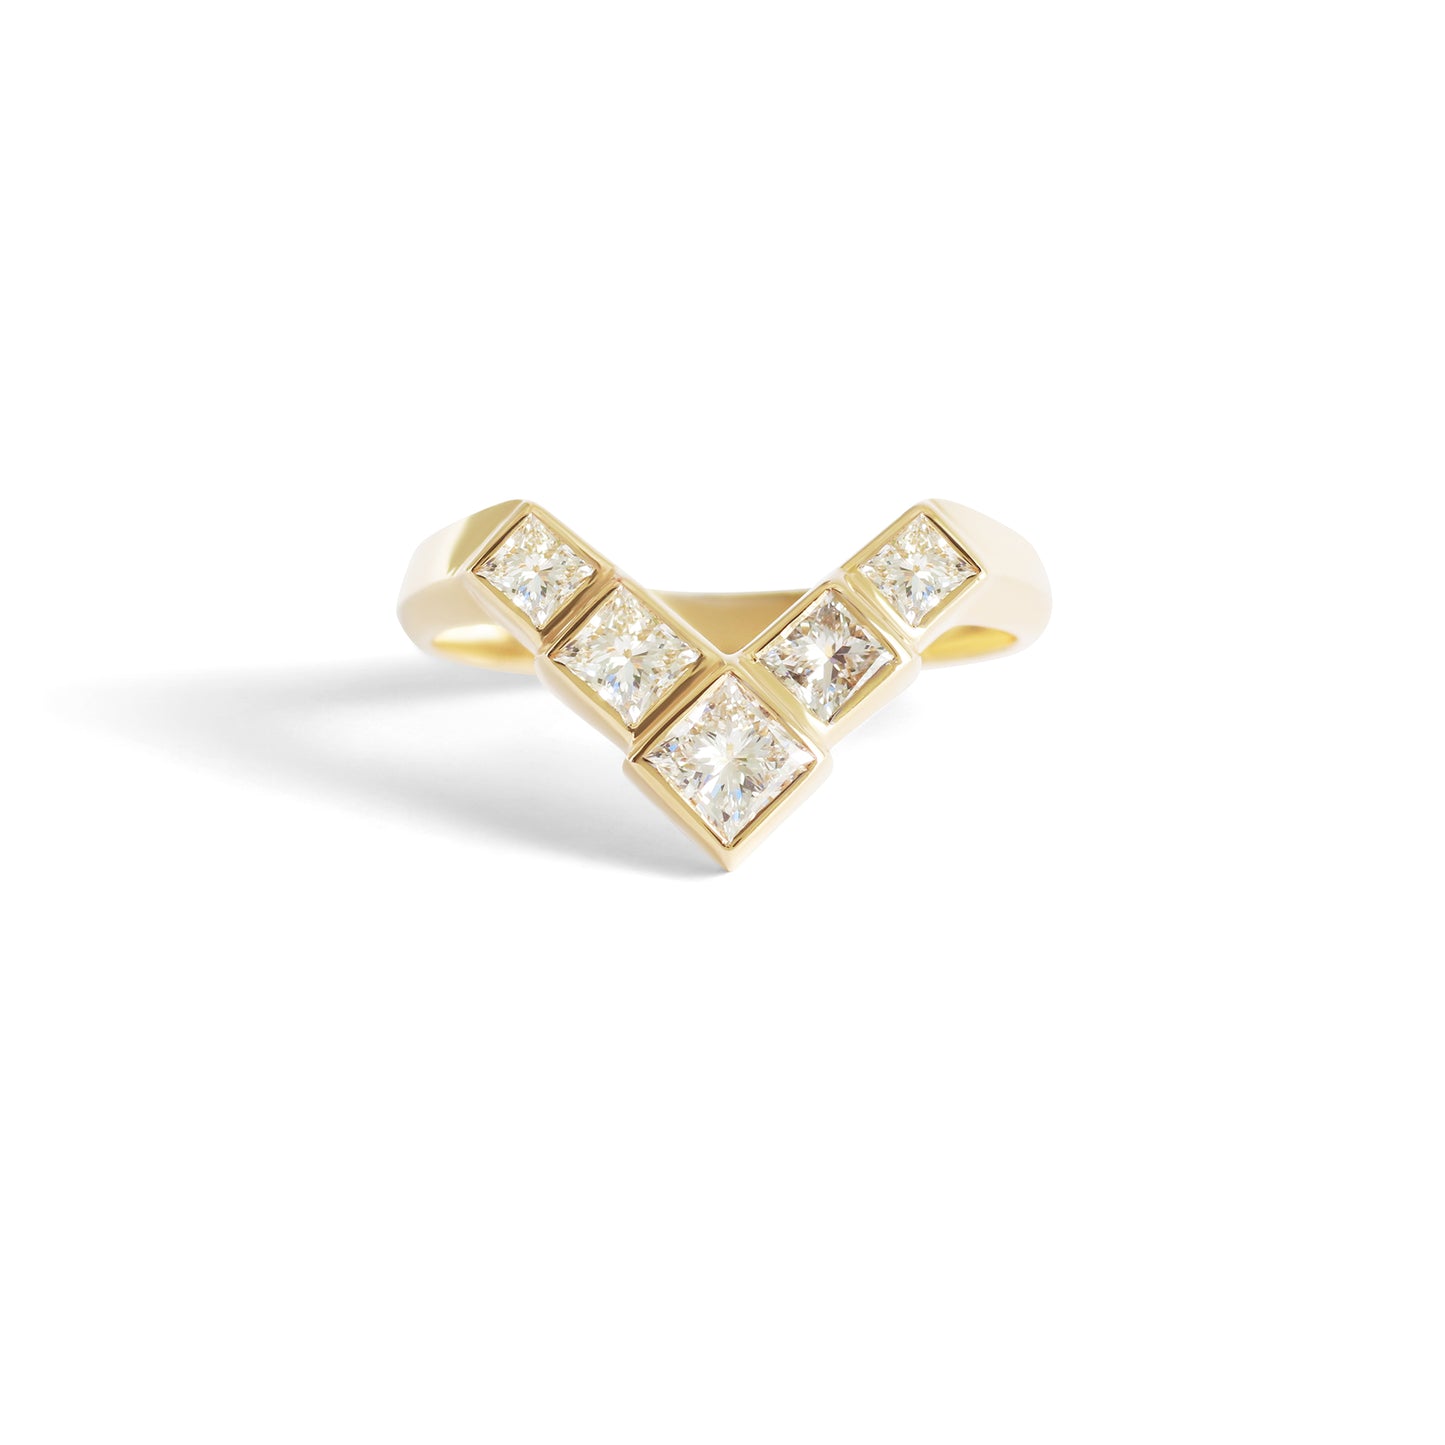 Load image into Gallery viewer, V Ring / Princess Cut Diamonds 0.83ct - Goldpoint Studio - Greenpoint, Brooklyn - Fine Jewelry
